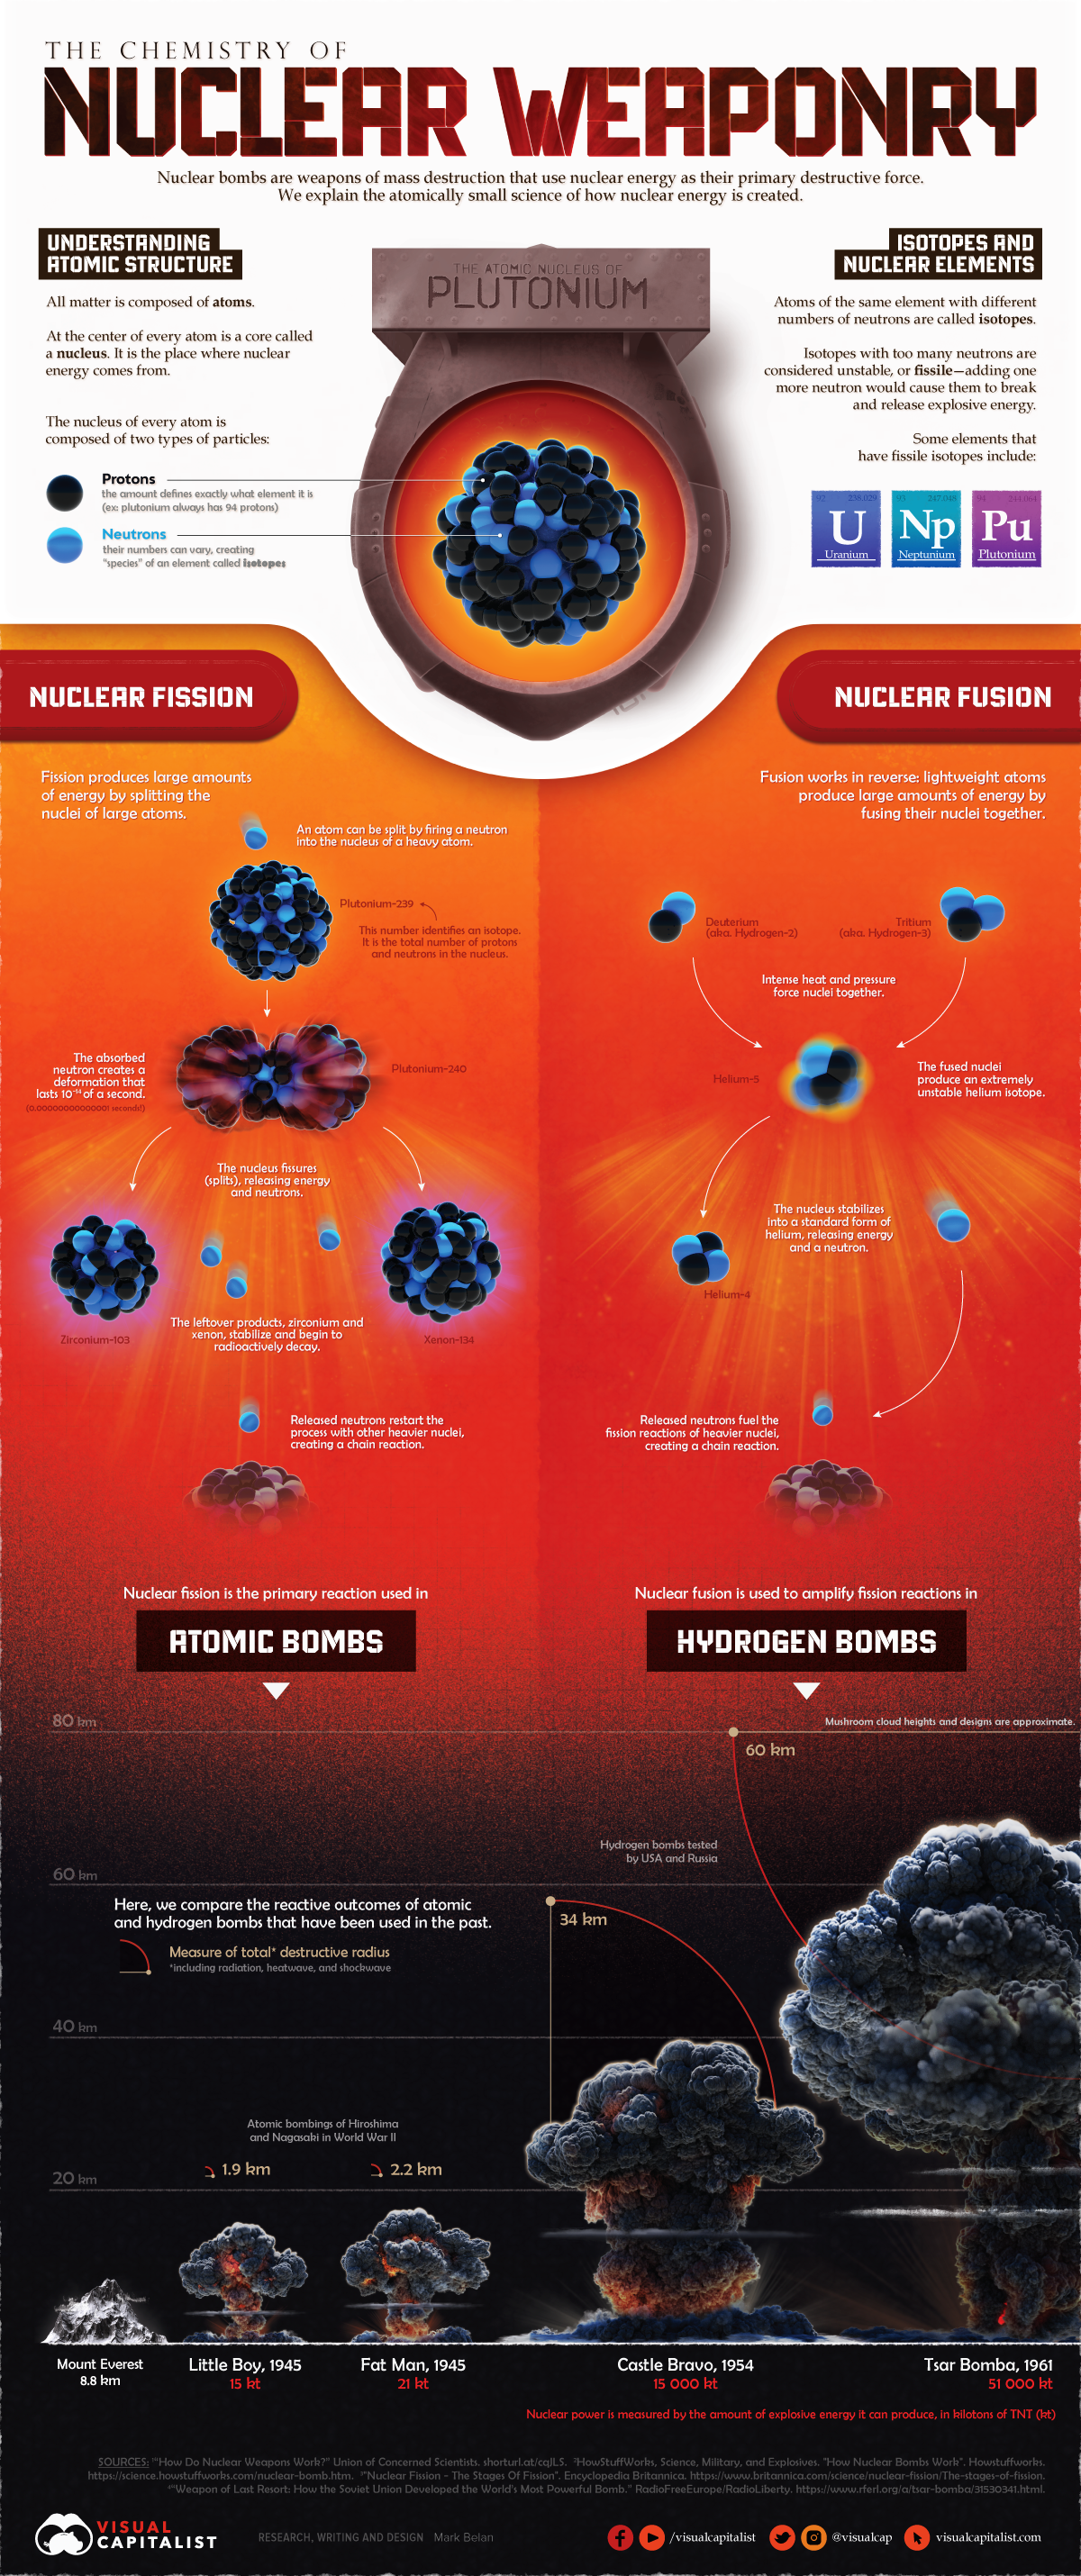 this infographic visualizes the science of how nuclear weapons work, including the processes of fission and fusion